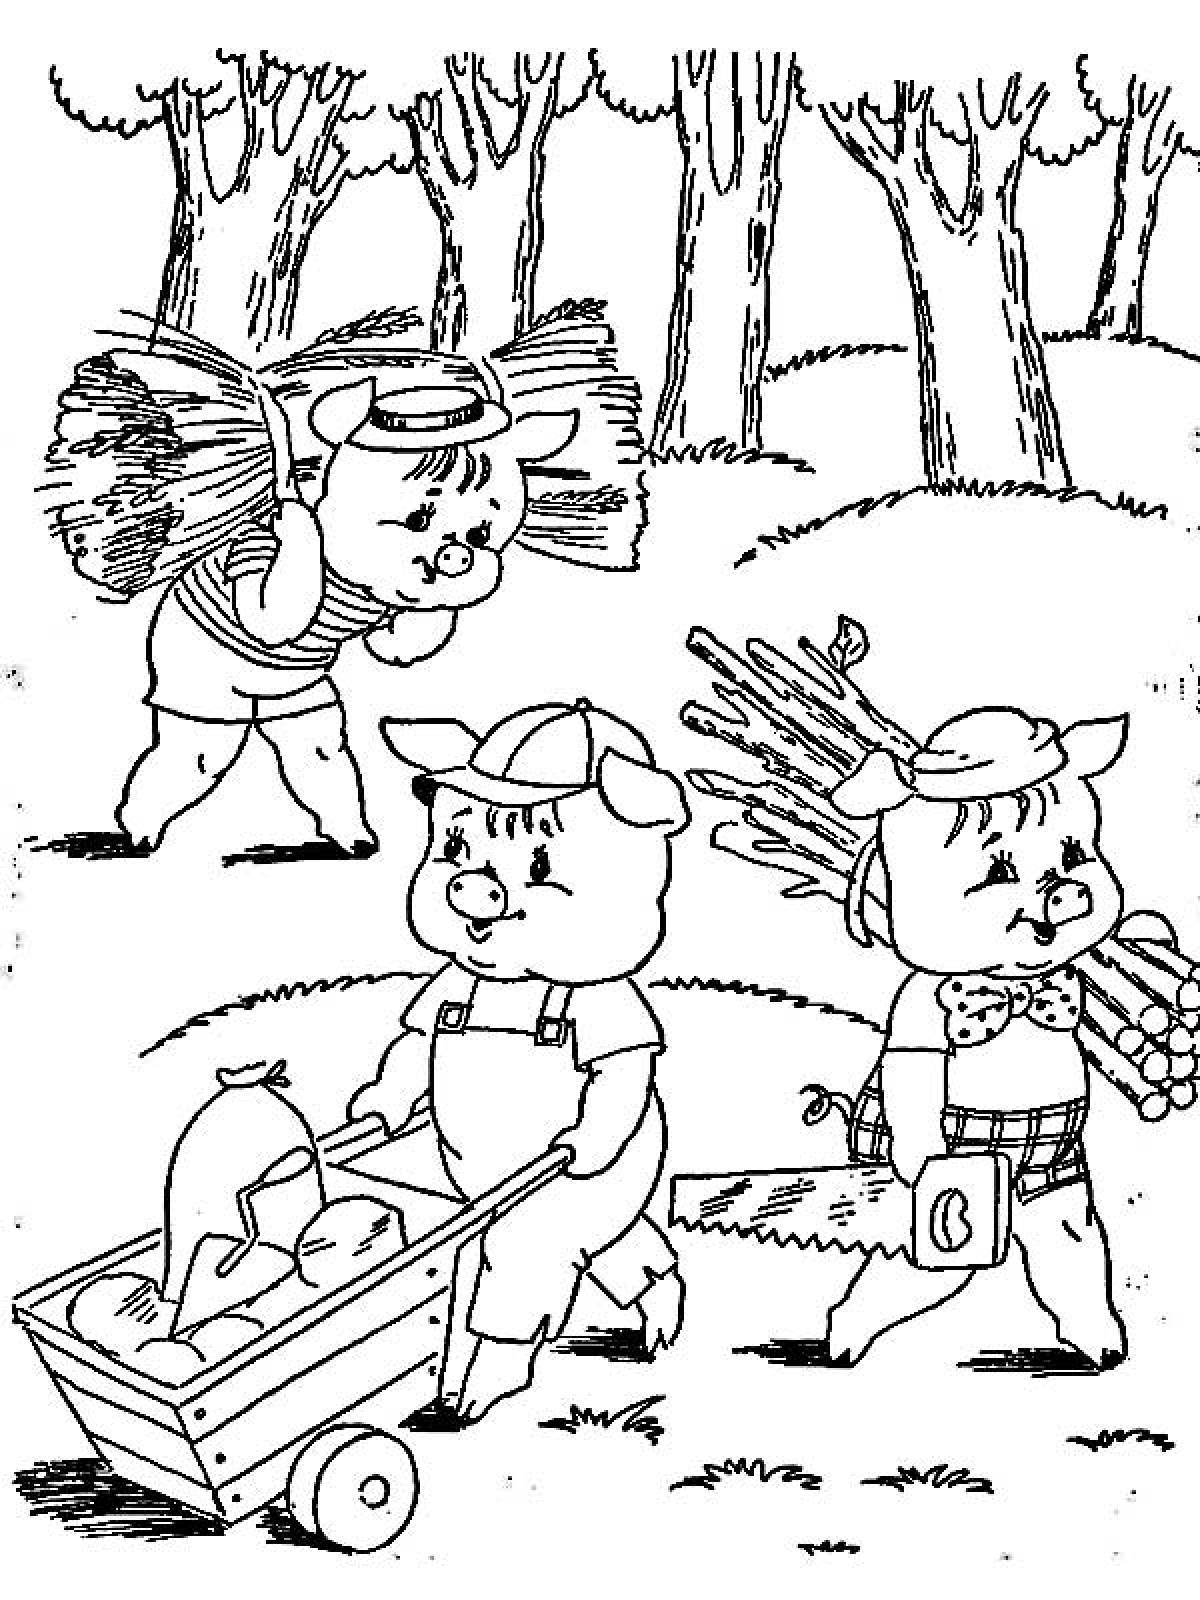 Pigs in the forest